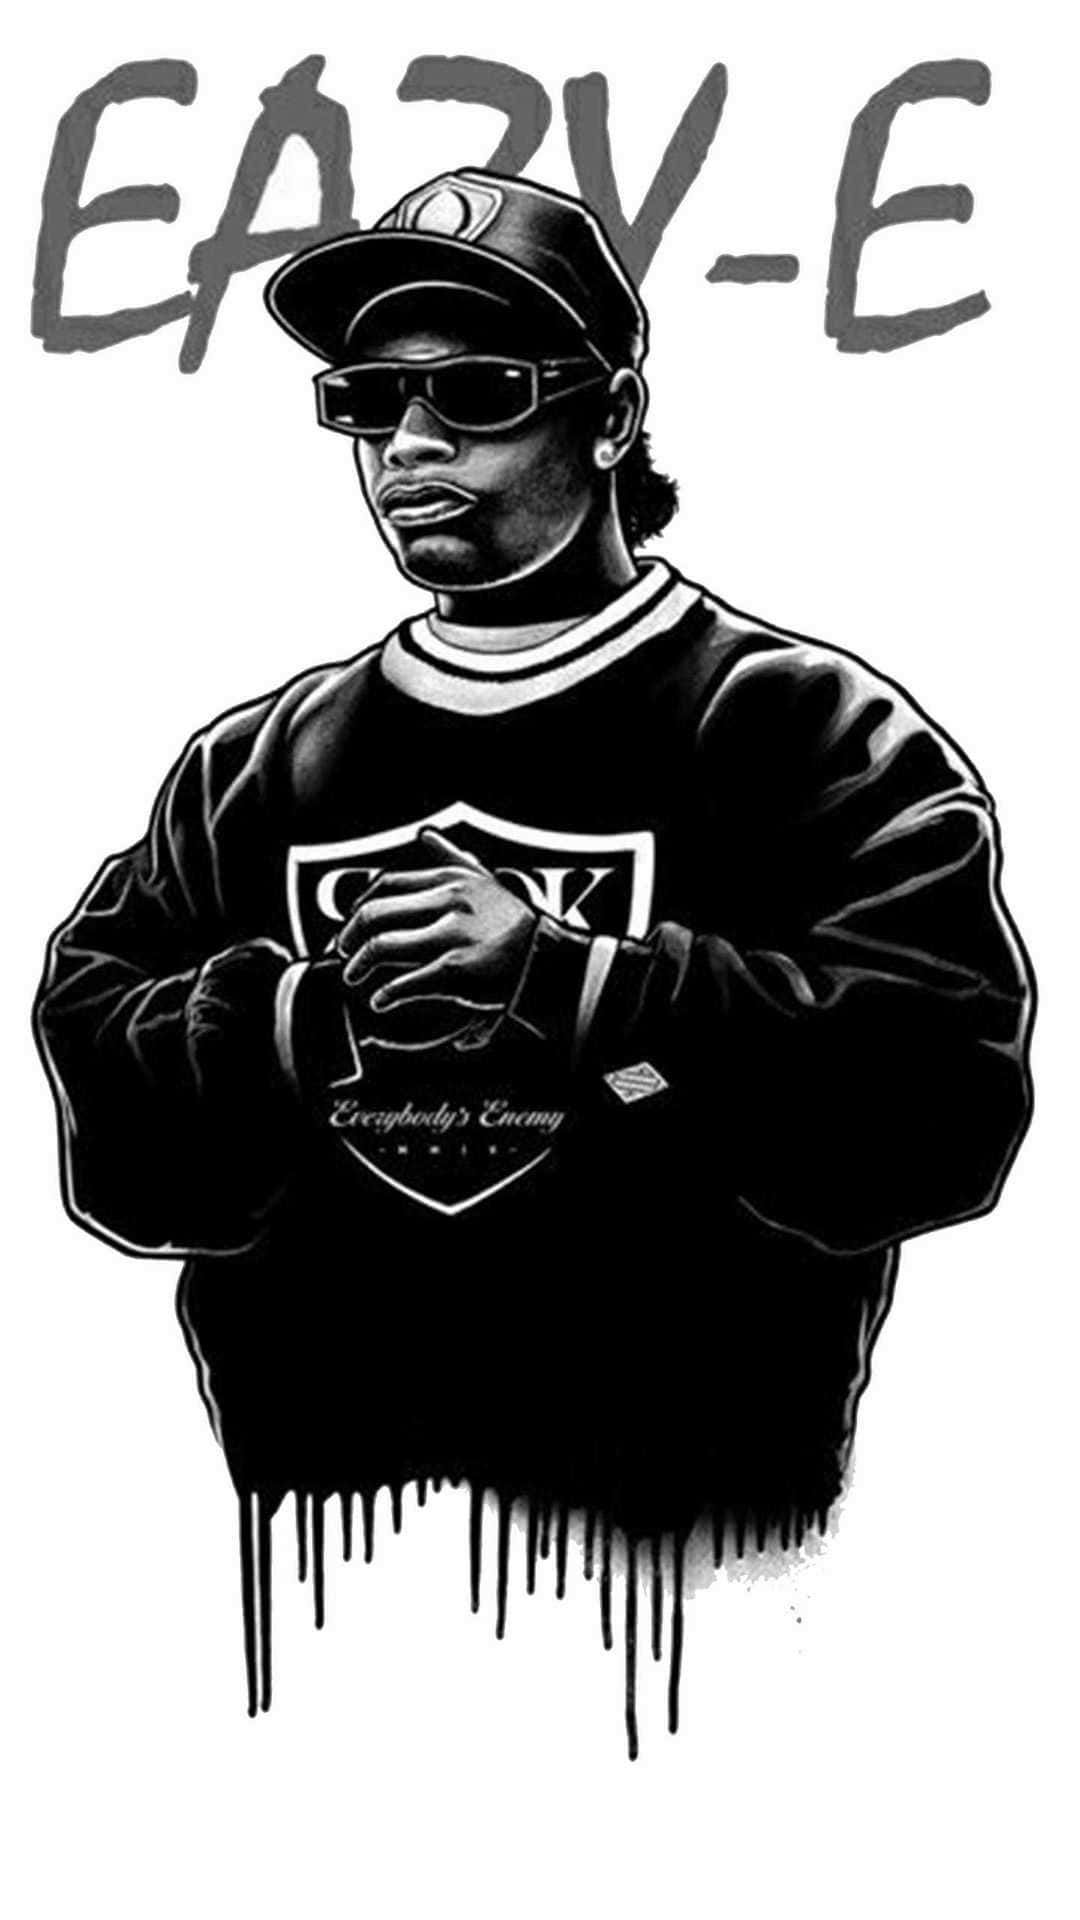 Eazy E Wallpaper Browse Eazy E Wallpaper with collections of Cool Eazy E  Gangsta ice Cube Iphone httpsww  Hip hop wallpaper Rap wallpaper  Hip hop poster